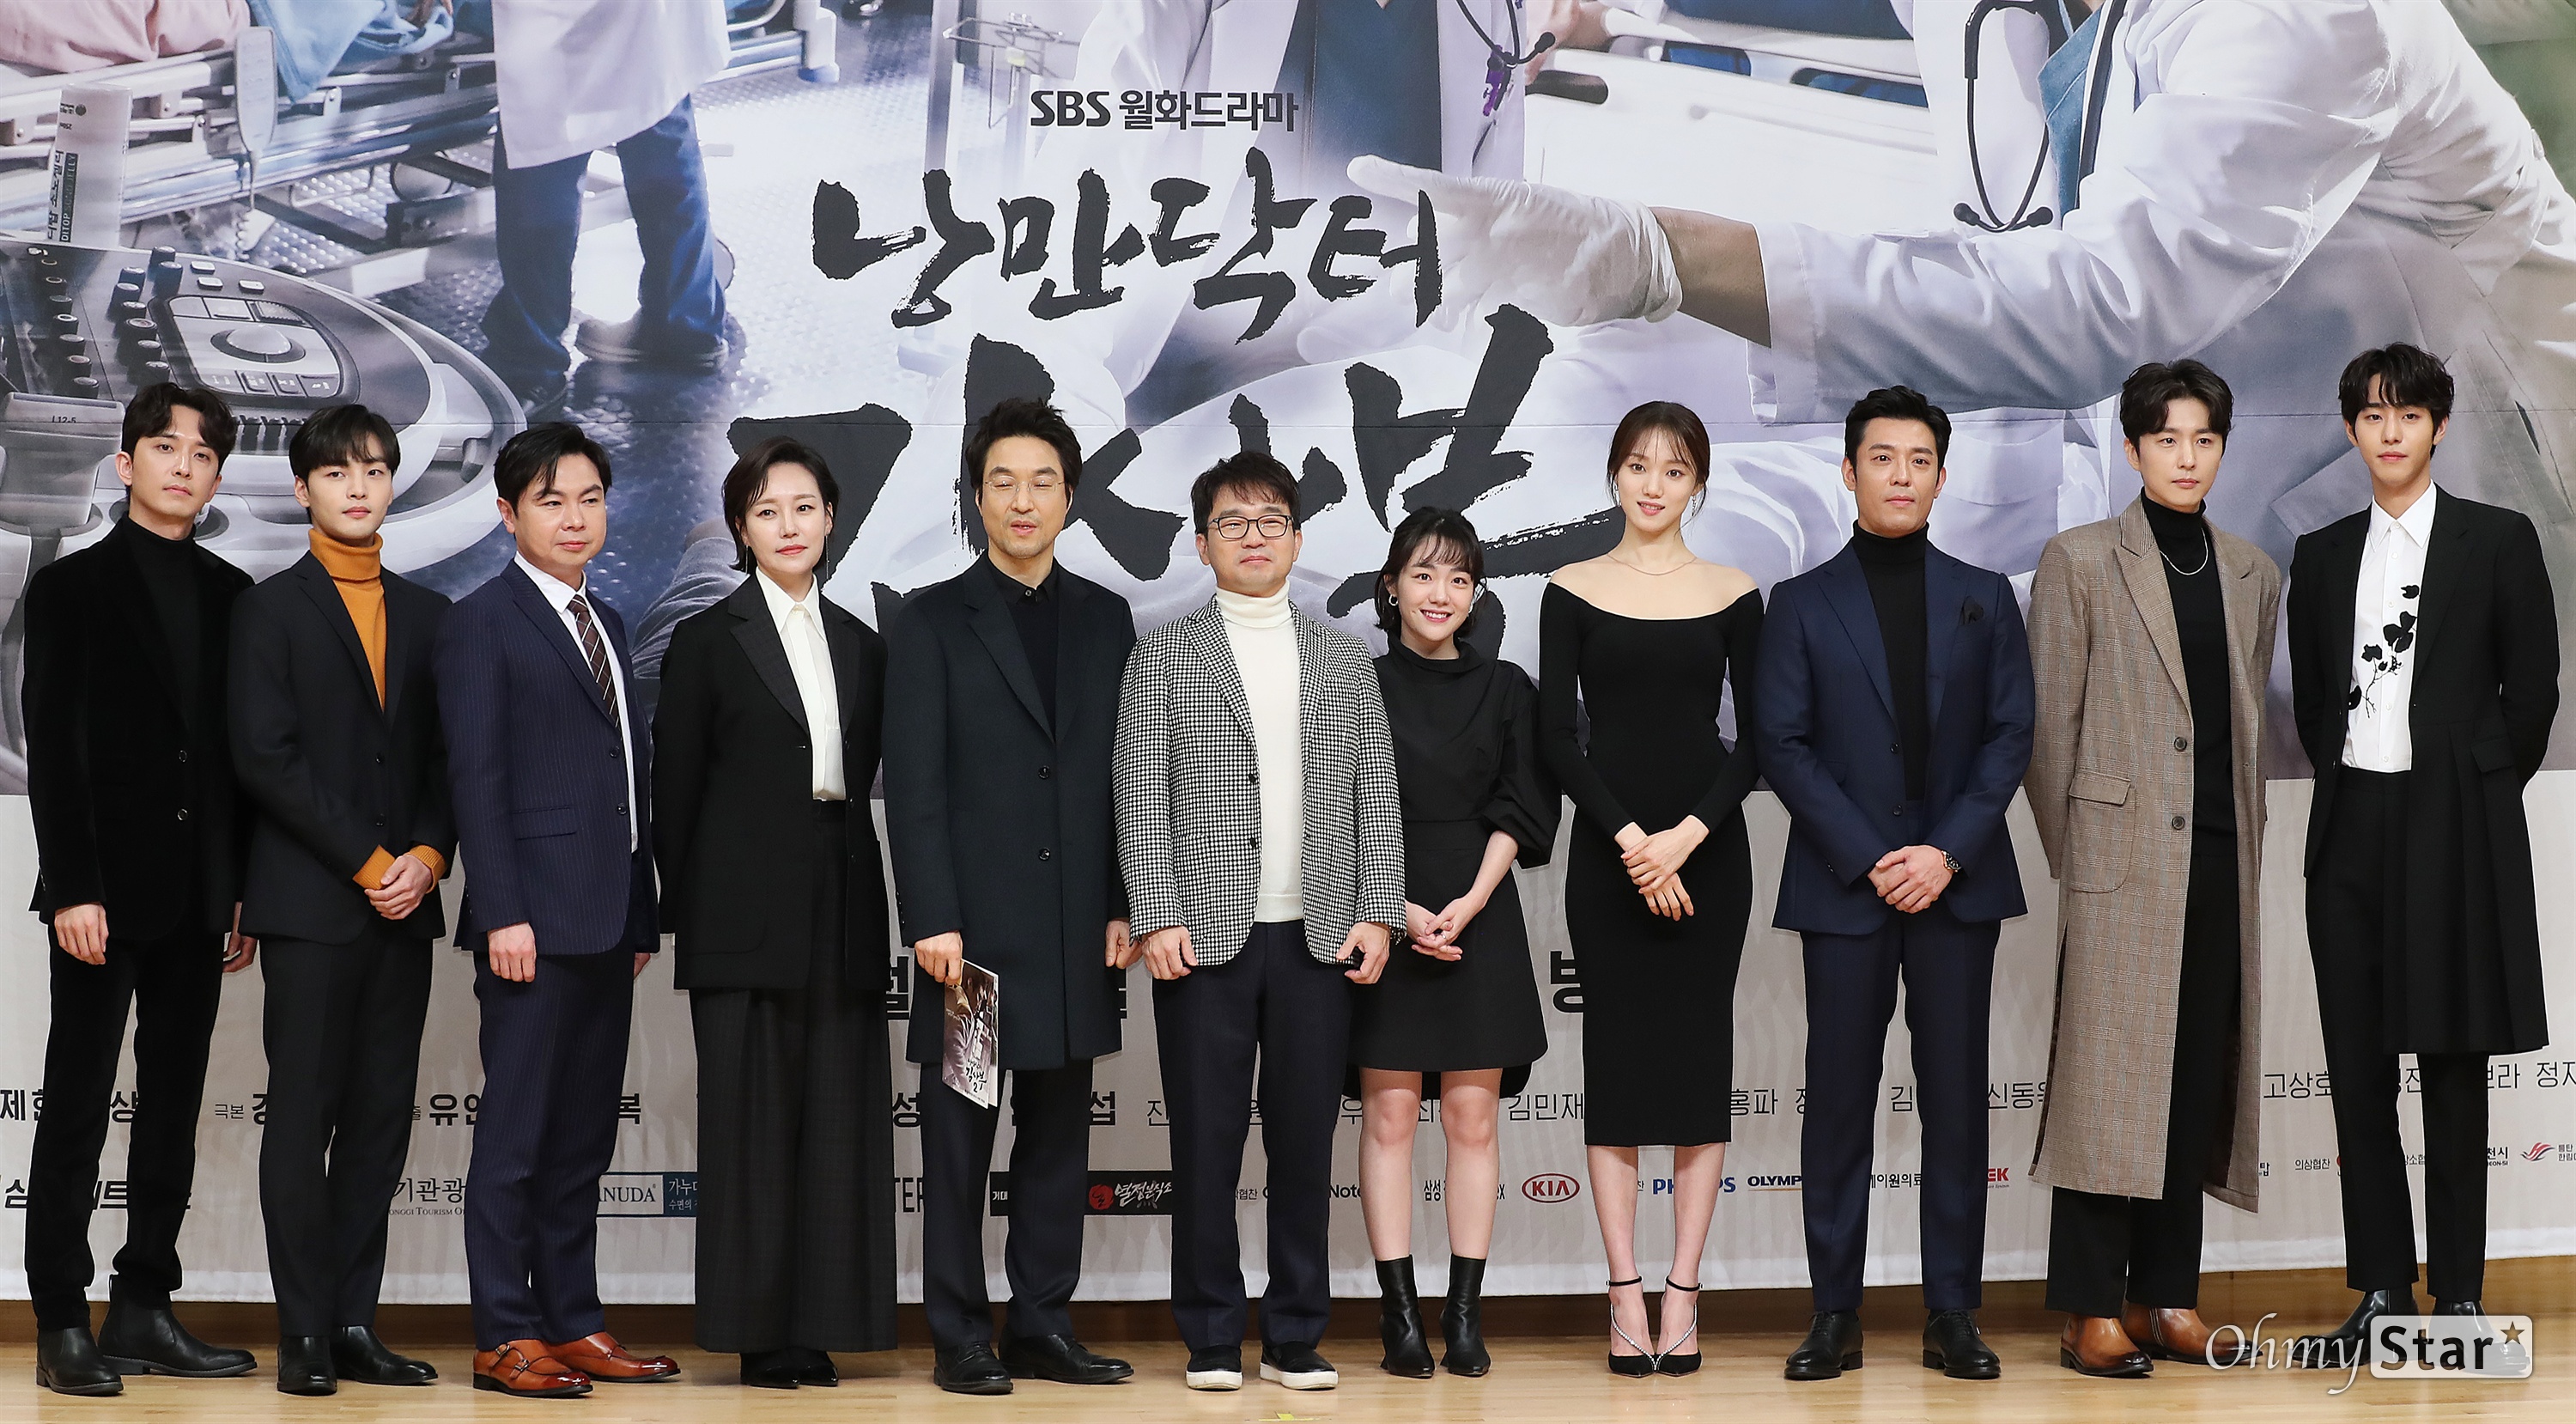 Romantic Doctor Kim Sabu will return in three years. At the time of the season 1, it received a high audience rating of 27.6% and received great love from viewers.The second season of Romantic Doctor Kim Sabu features a new harmony: Kang Eun-kyung, director Yoo In-sik and Han Suk-kyu Actor reunited after season 1.Actor Jin Kyung, Im Won Hee, Kim Min Jae, and Yun Na-mae also became members of the old stone wall this season after the previous season.On the afternoon of the 6th, Romantic Doctor Kim Sabu 2 production presentation was held at SBS office in Mok-dong, Seoul. <Romantic Doctor Kim Sabu 2> will be broadcasted at 9:40 pm on the 6th.It will be broadcast continuously with 20 minutes pulled from the existing 10 oclock broadcast.If the members of old stone wall hold the identity of the drama firmly, the members of Shin stone wall bring new vitality to the drama.Actor Lee Sung-kyung, Ahn Hyo-seop, Kim Joo-heon, Shin Dong-wook and So Ju-yeon joined the Shin Stone Dam members, especially the main characters Ahn Hyo-seop and Lee Sung-kyung.Seo Woo-jin, played by Ahn Hyo-seop, is a cynical character in everything because he has been through a hard life since he was a child.However, in the operating room, it is a surgical fellow who has excellent ability with tremendous concentration and sensitive handwork.What about their co-work?When asked about this, Ahn Hyo-seop replied, I always get a lot of positive energy from Lee Sung-kyung. Lee Sung-kyung replied, Hyo-seop is a lot of stimulus to me because he studies so much and shows me growing up on the spot.Also, when asked if he had a kissing god, Yoo In-sik replied instead: There is a kissing god as good as season one, I think it will come out soon, he tipped.There were also questions about the strengths of Romantic Doctor Kim Sabu 2 because so many medical dramas were introduced. Han Suk-kyu replied.SBS New Mon-Tue Drama